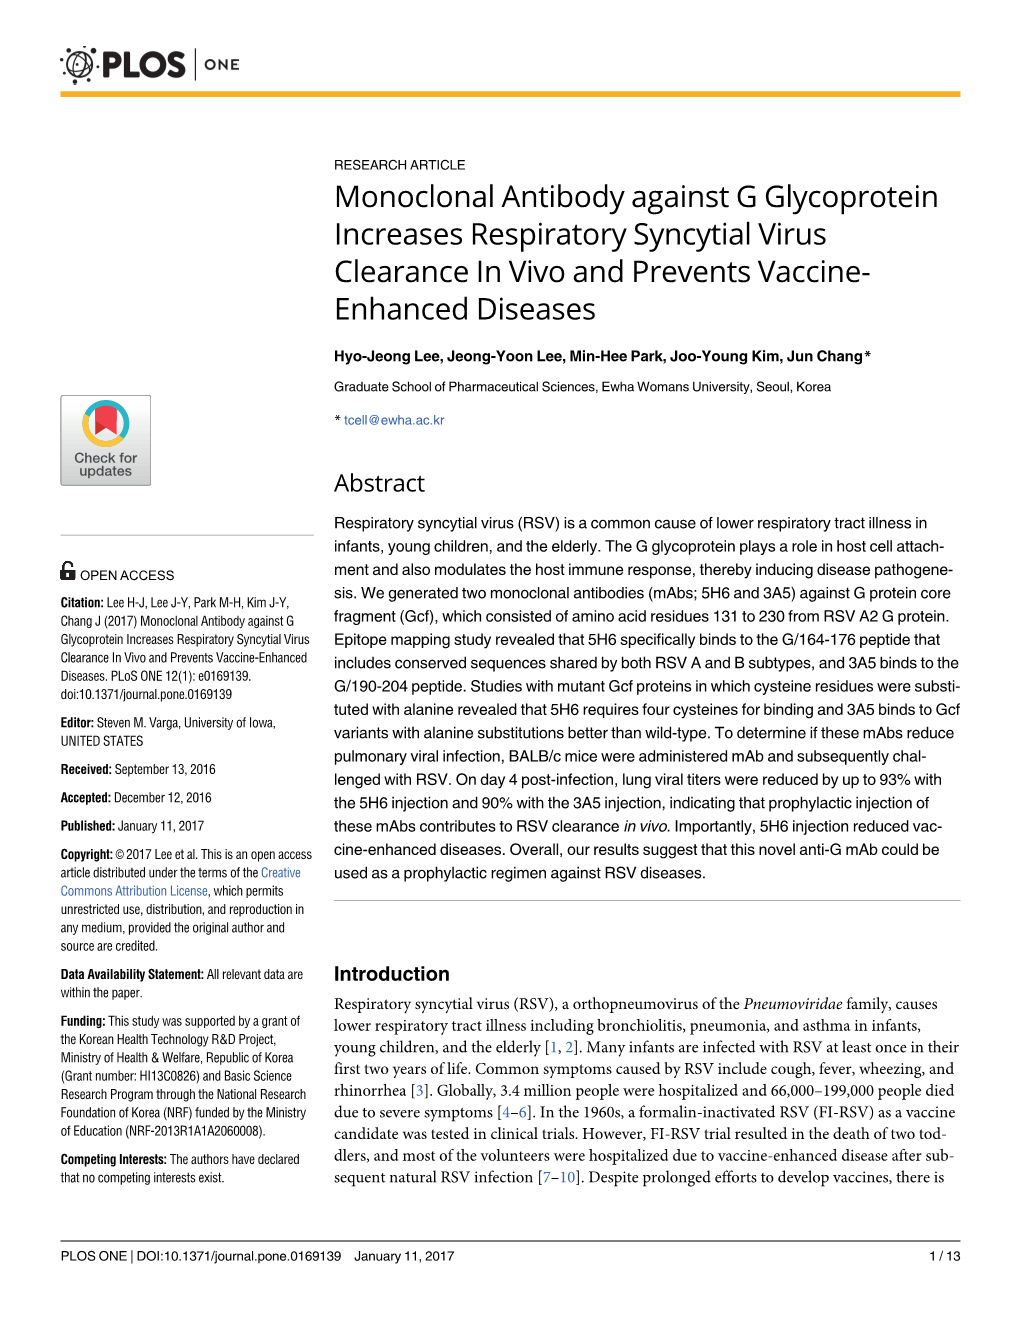 Monoclonal Antibody Against G Glycoprotein Increases Respiratory Syncytial Virus Clearance in Vivo and Prevents Vaccine- Enhanced Diseases